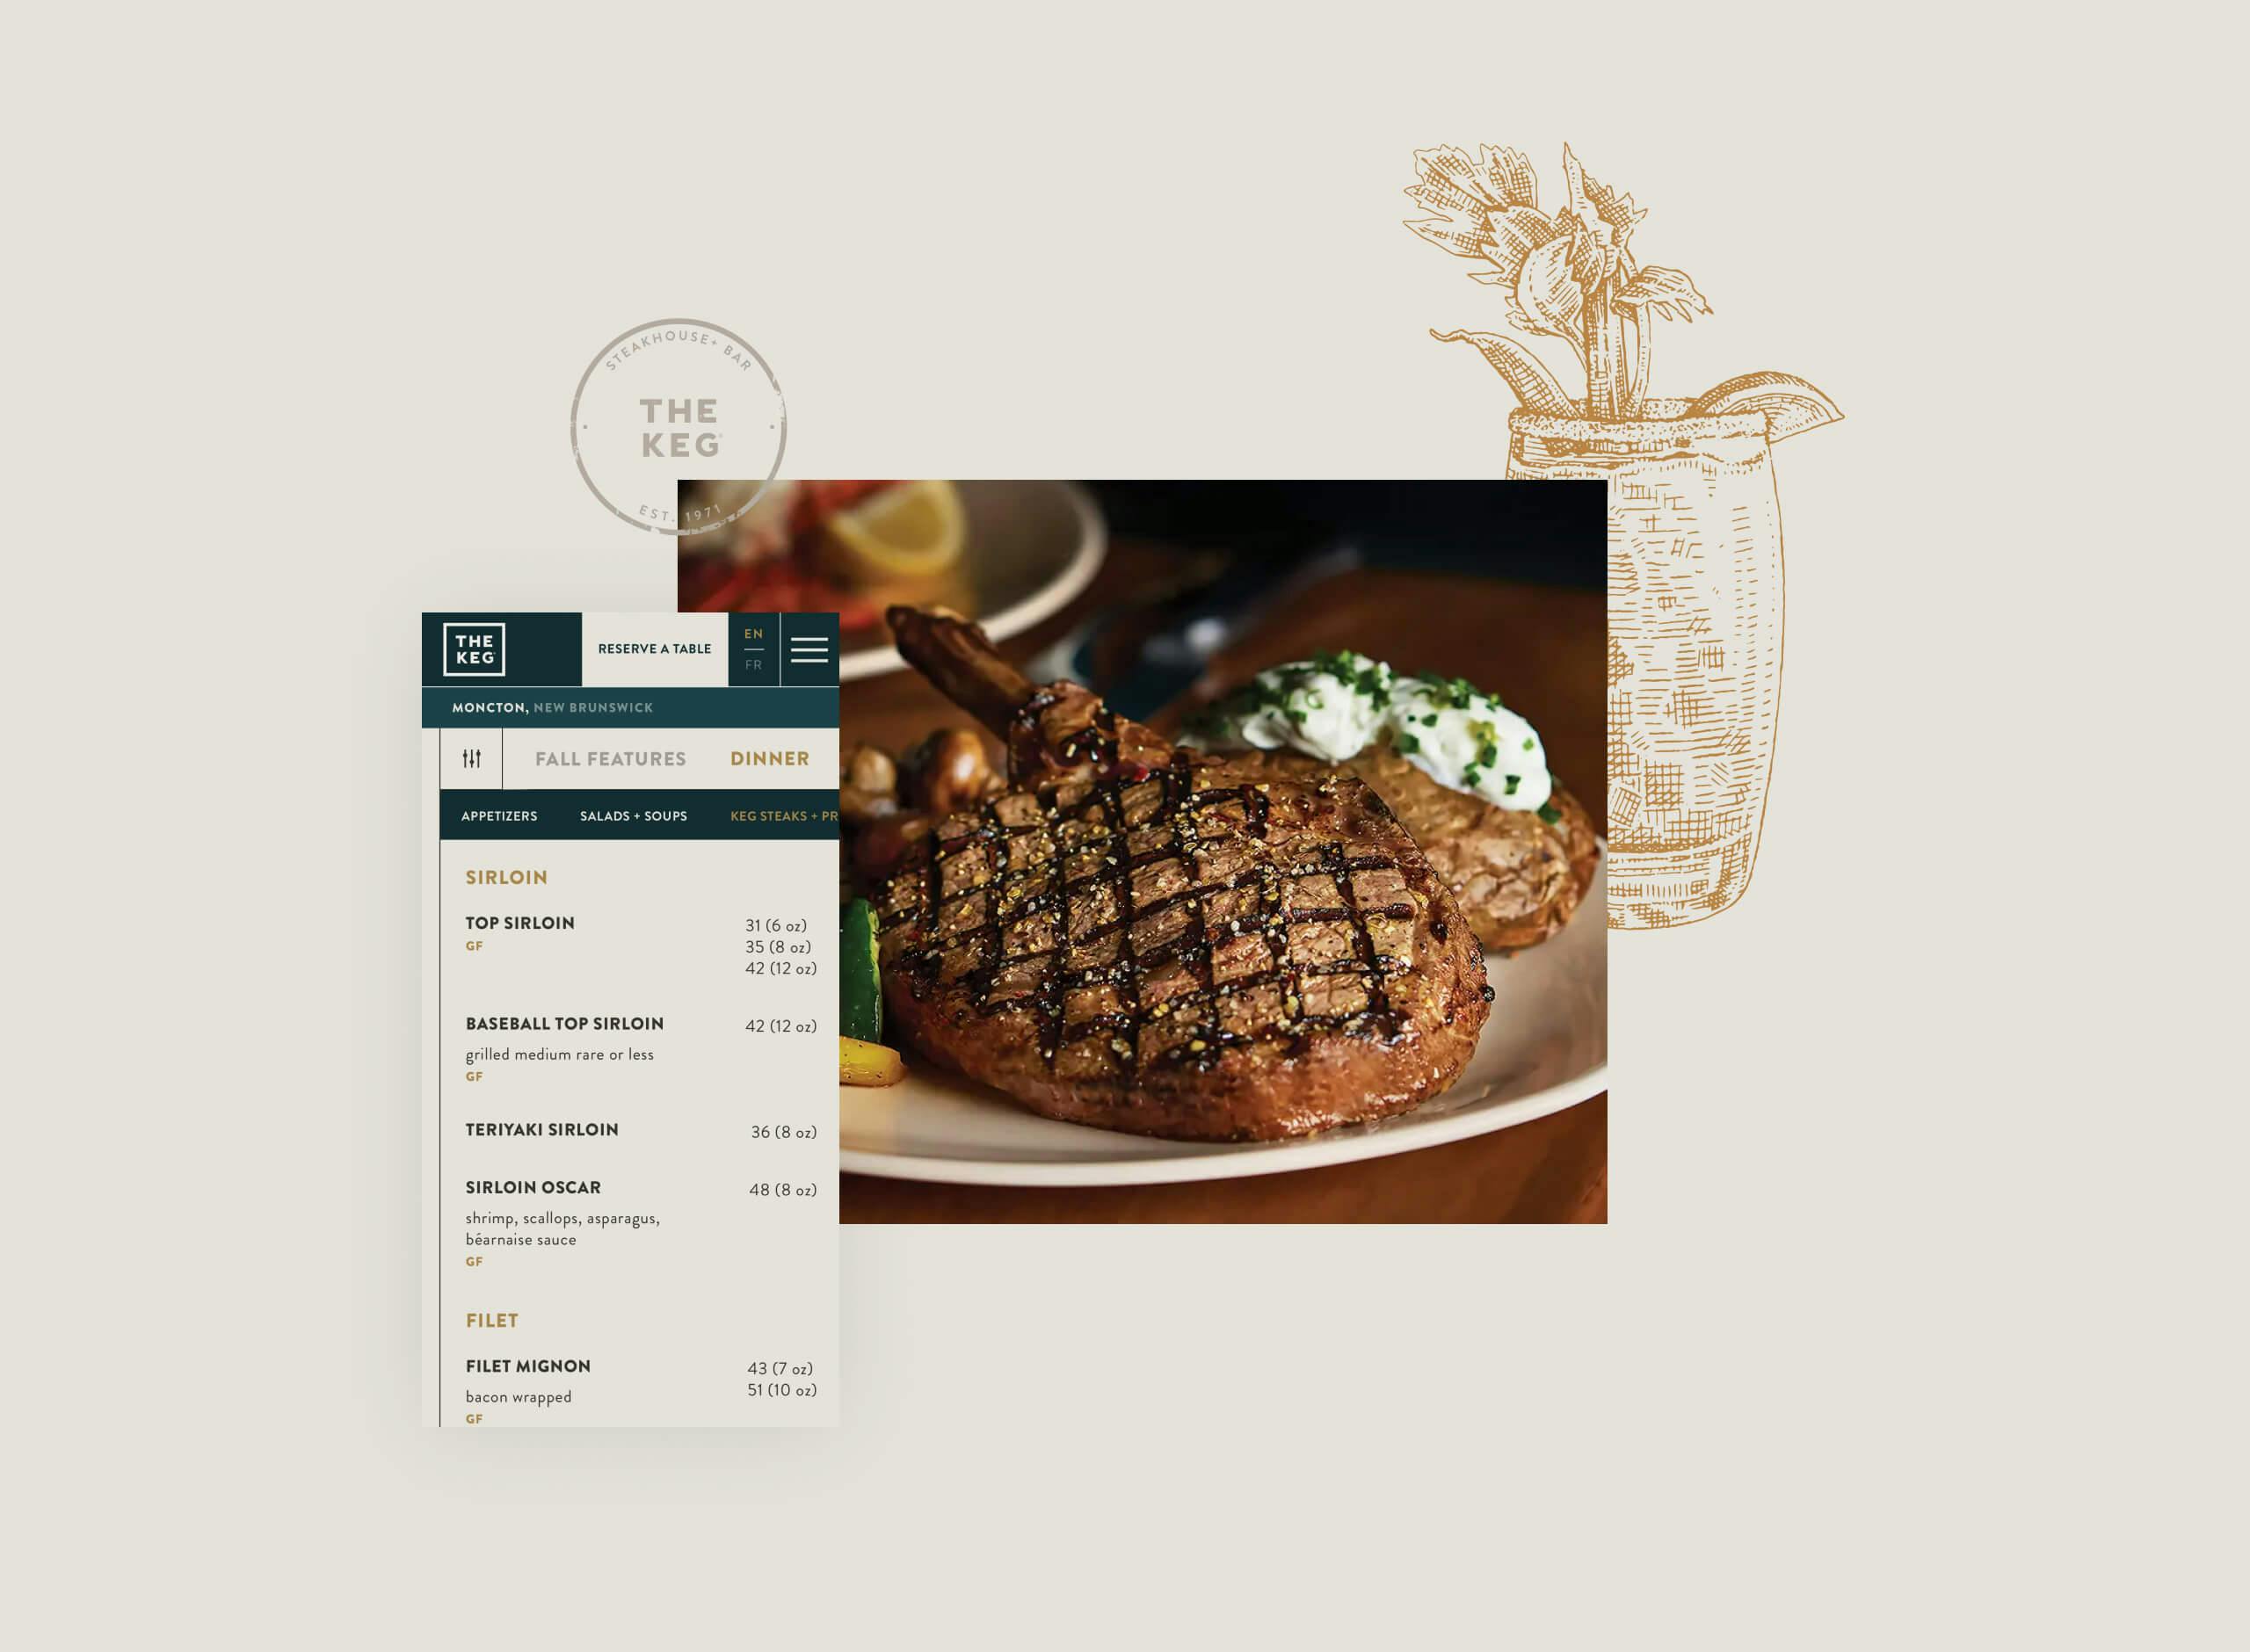 The Keg website features easy to use navigation and intuitive menu for users. The drop down menu asks for your location so that the correct restaurant menu can be viewed.